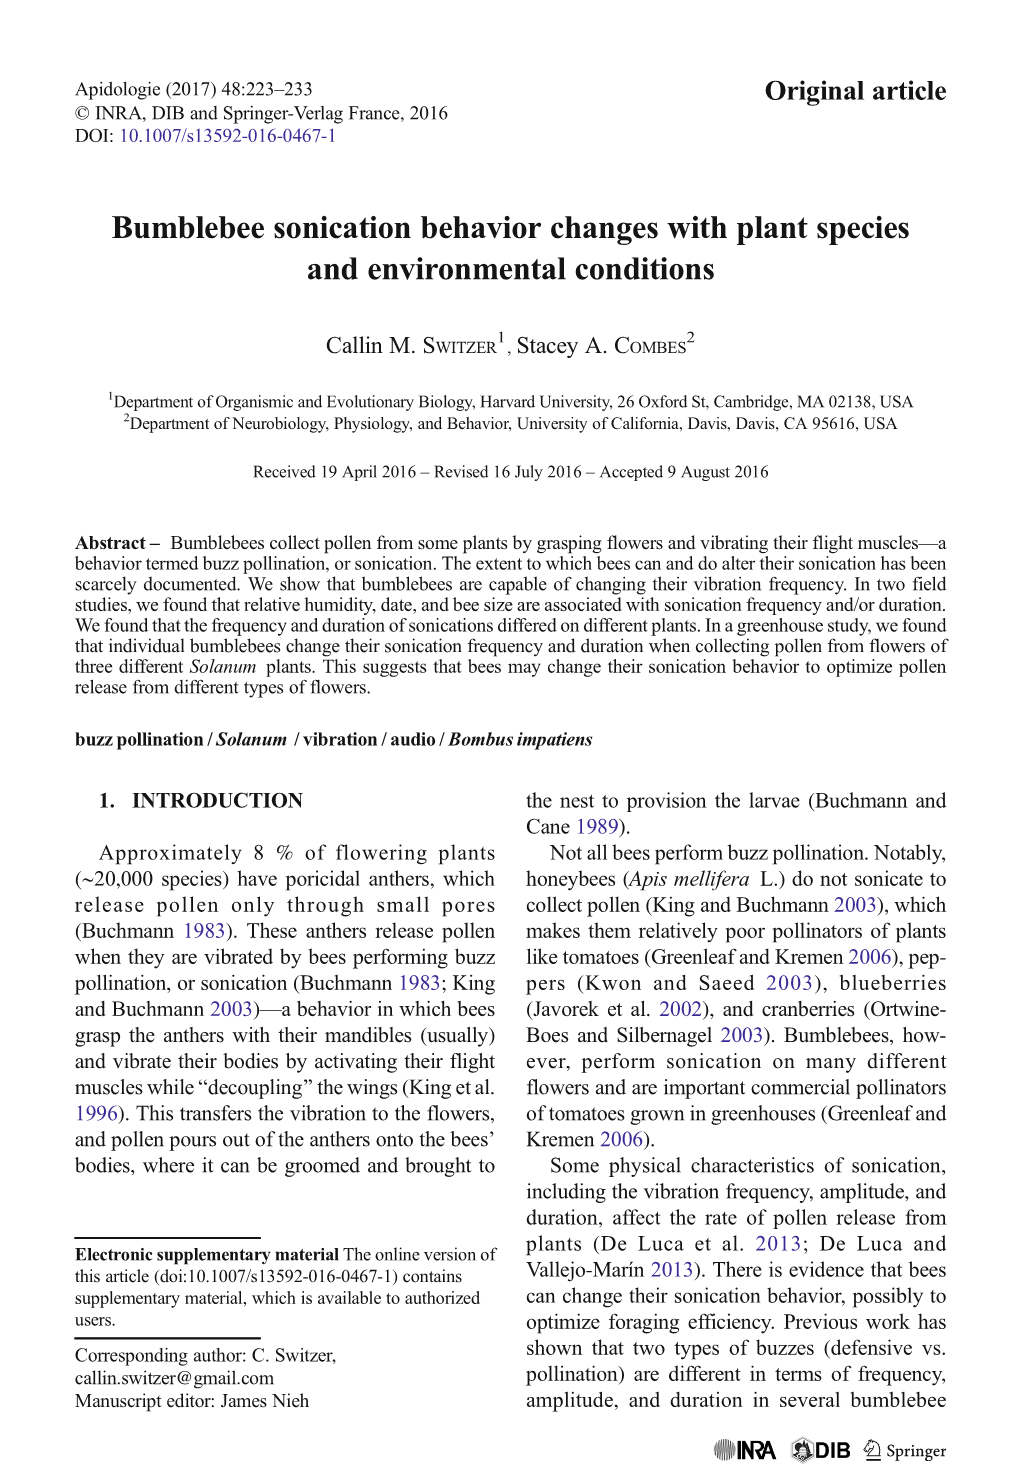 Bumblebee Sonication Behavior Changes with Plant Species and Environmental Conditions